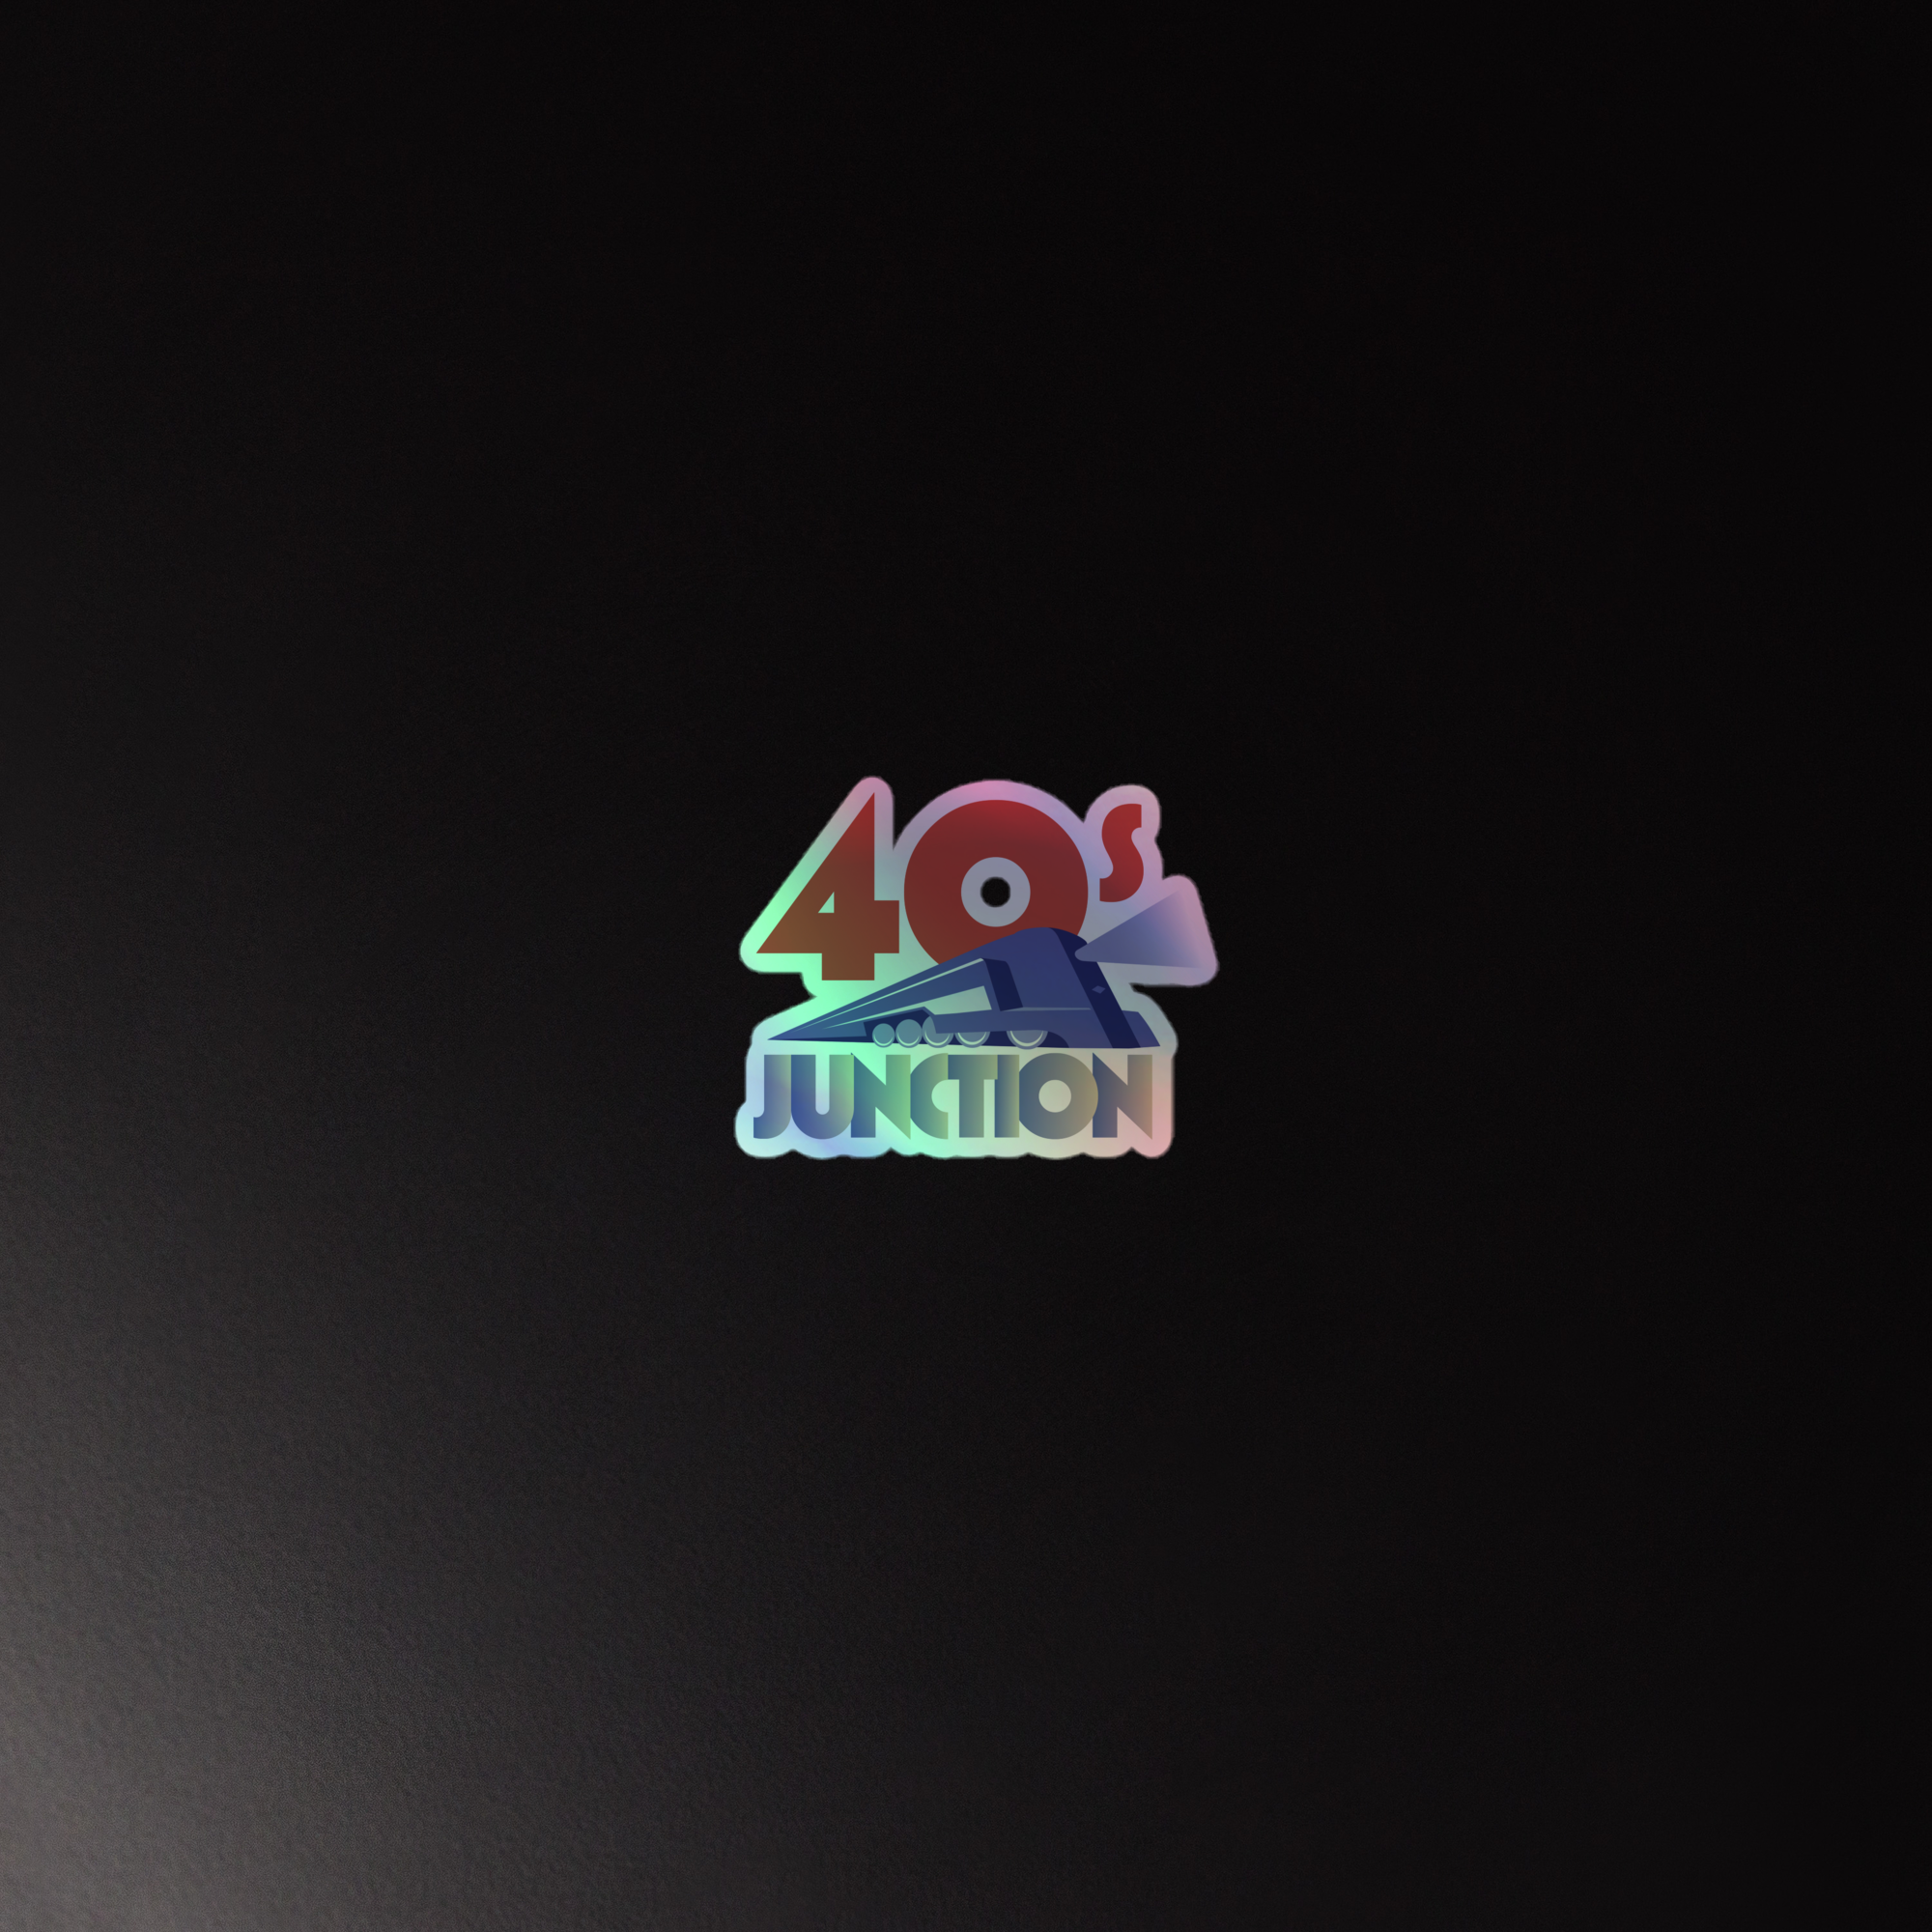 40s Junction: Holographic Sticker